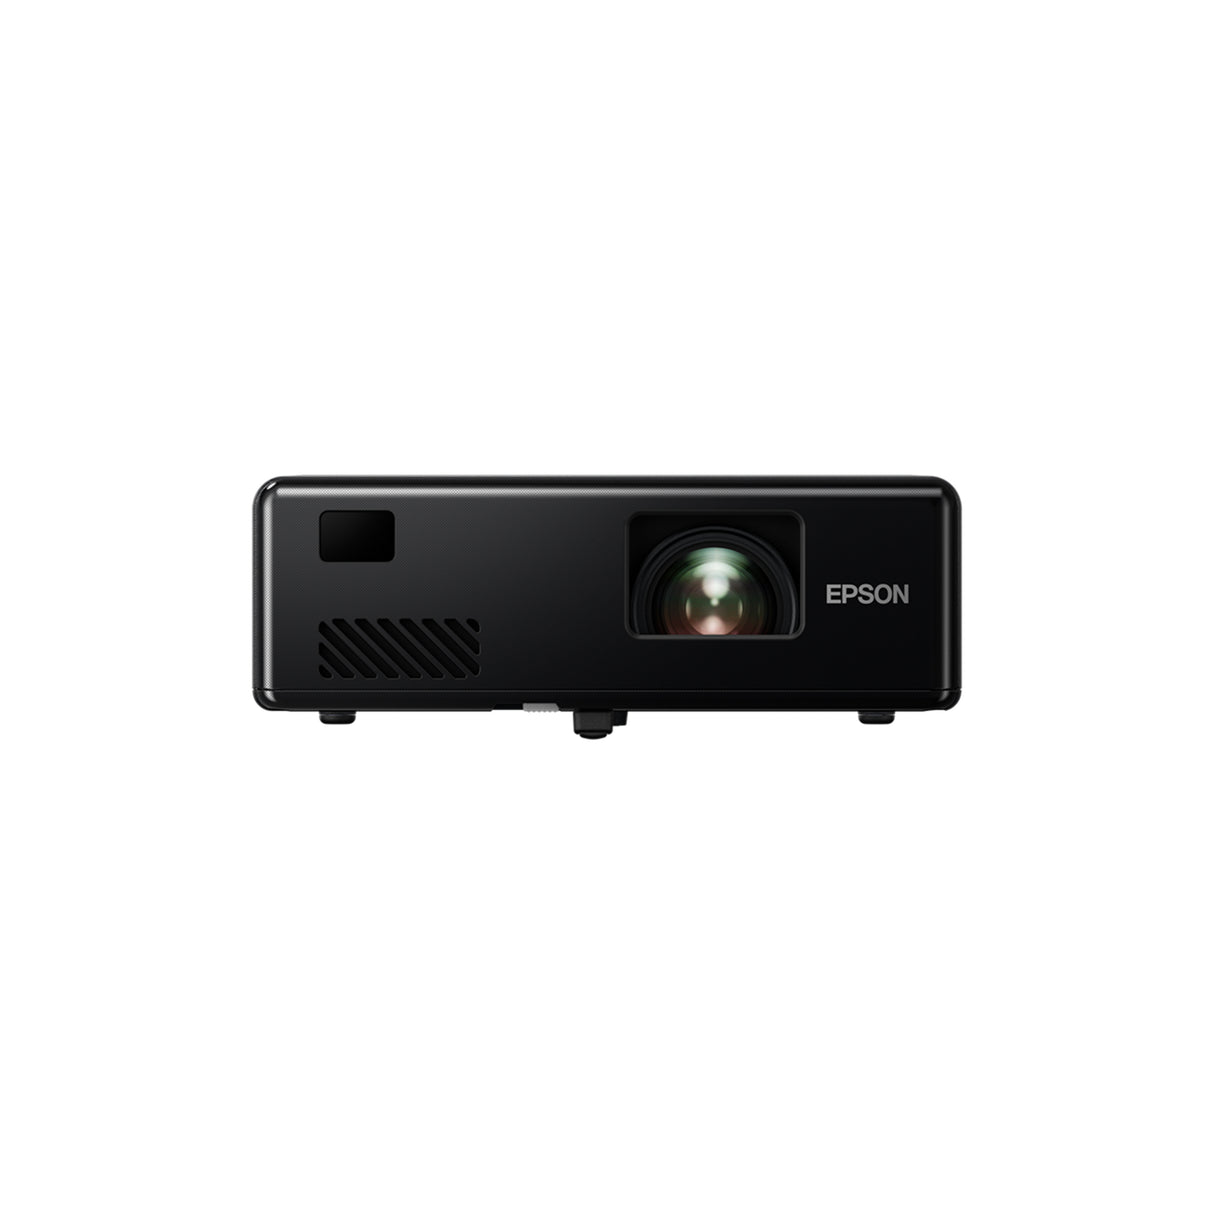 Epson EF-11 - 3LCD 1080p Full HD Laser Projector